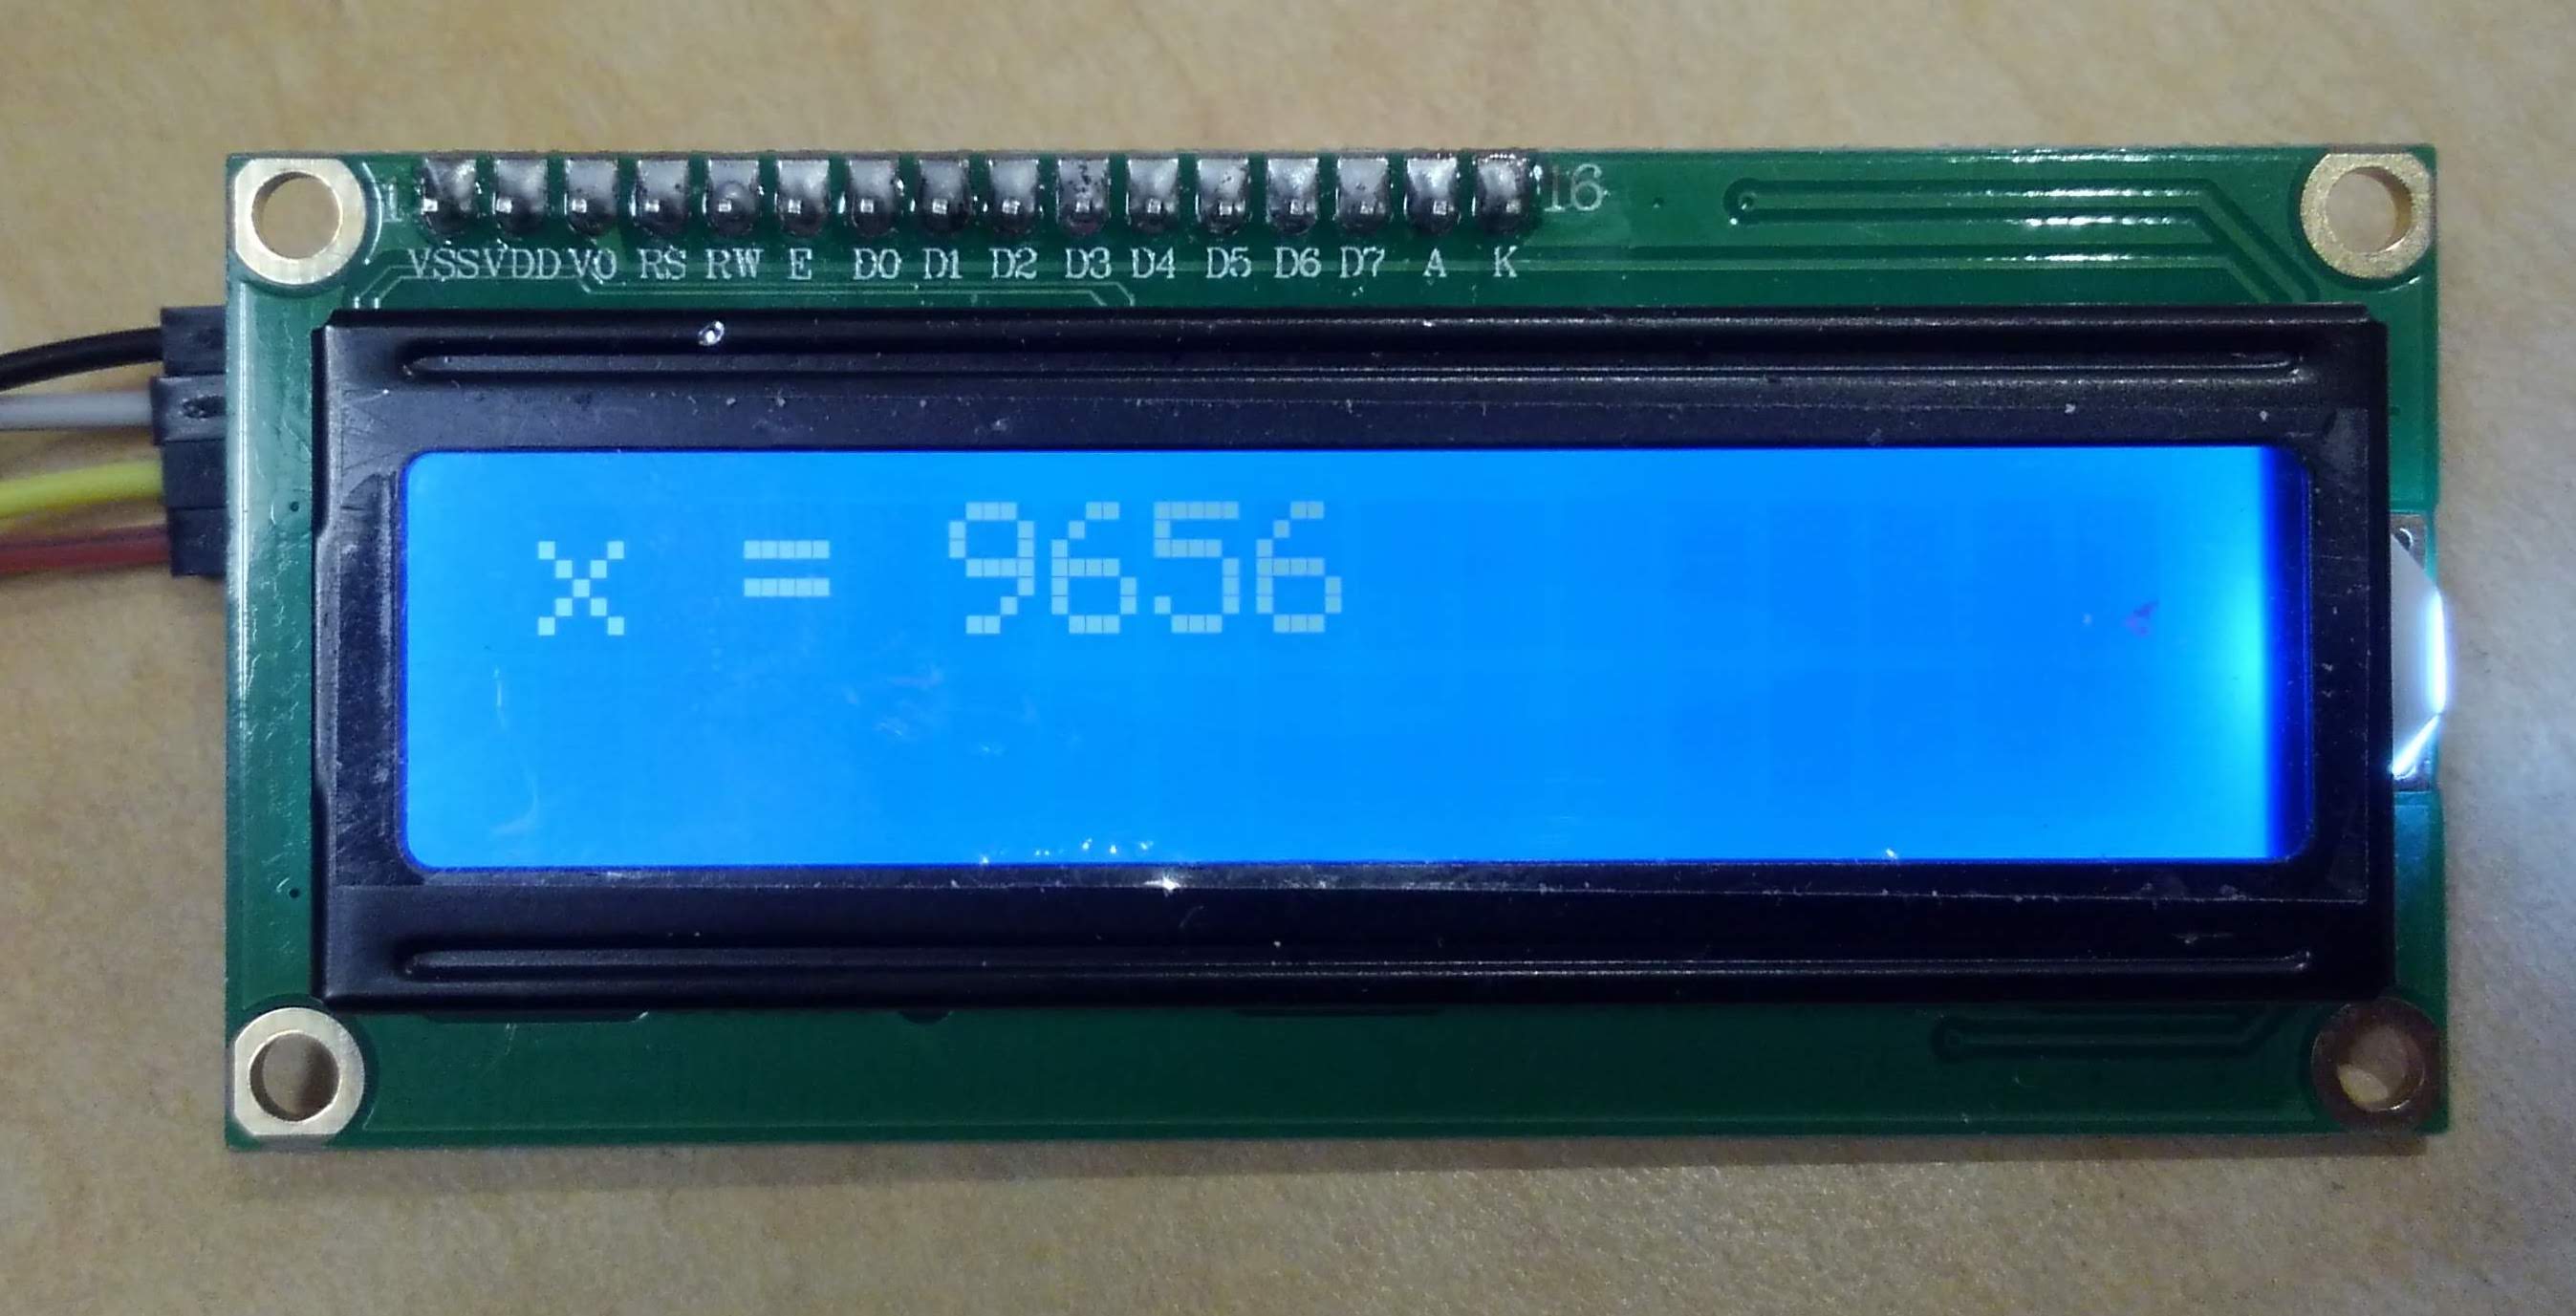 Image of an I2C LCD screen with a blue background, displaying the text "x = 9656" in the upper left corner. Four wires come from the back of the device and run out of frame.